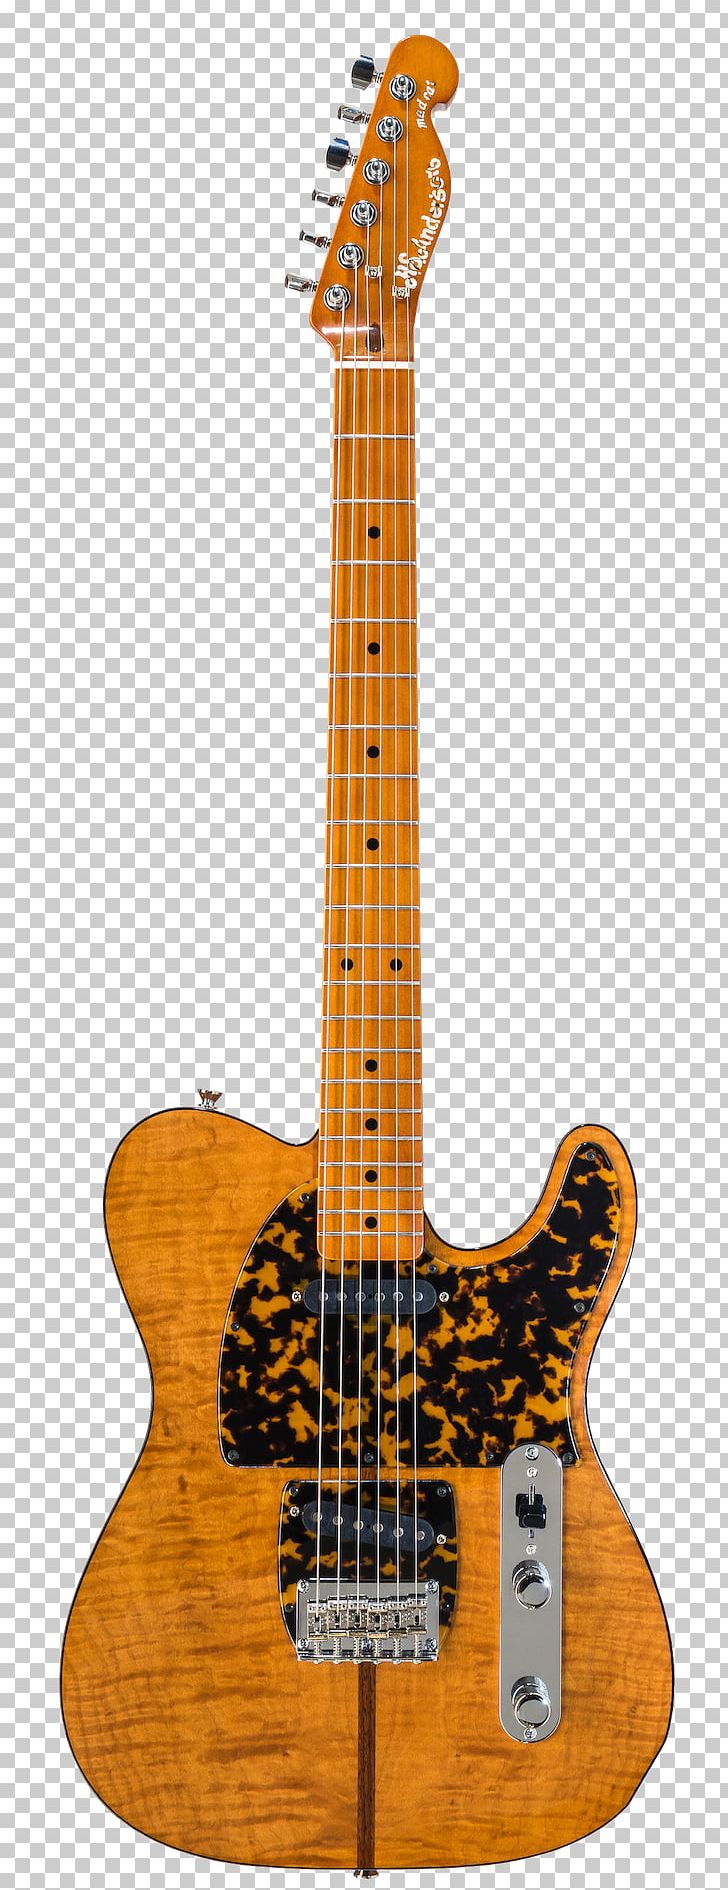 Fender Telecaster Fender Stratocaster Musical Instruments Bass Guitar PNG, Clipart, Acoustic Electric Guitar, Double Bass, Guitar, Guitar Accessory, Humbucker Free PNG Download